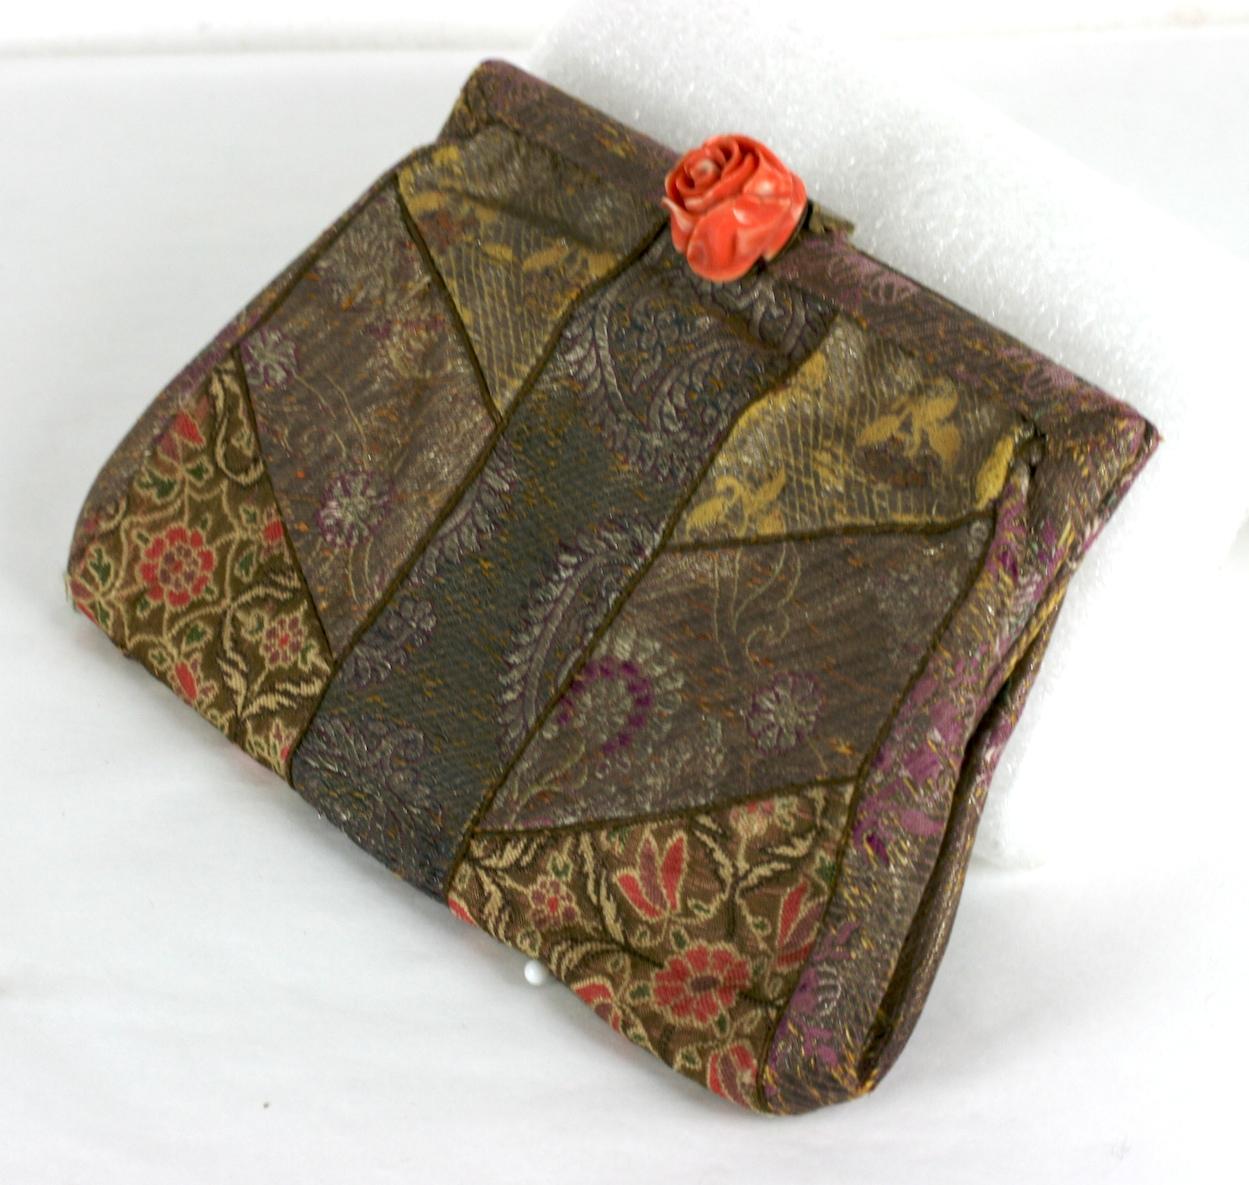 French Art Deco Anglo Indian evening clutch bag composed of a  patchwork of  19th century silk lame sari fabrics of various floral patterns with clasp of a genuine orange coral rose set in silver, Self wristband for dancing.
Excellent condition. 